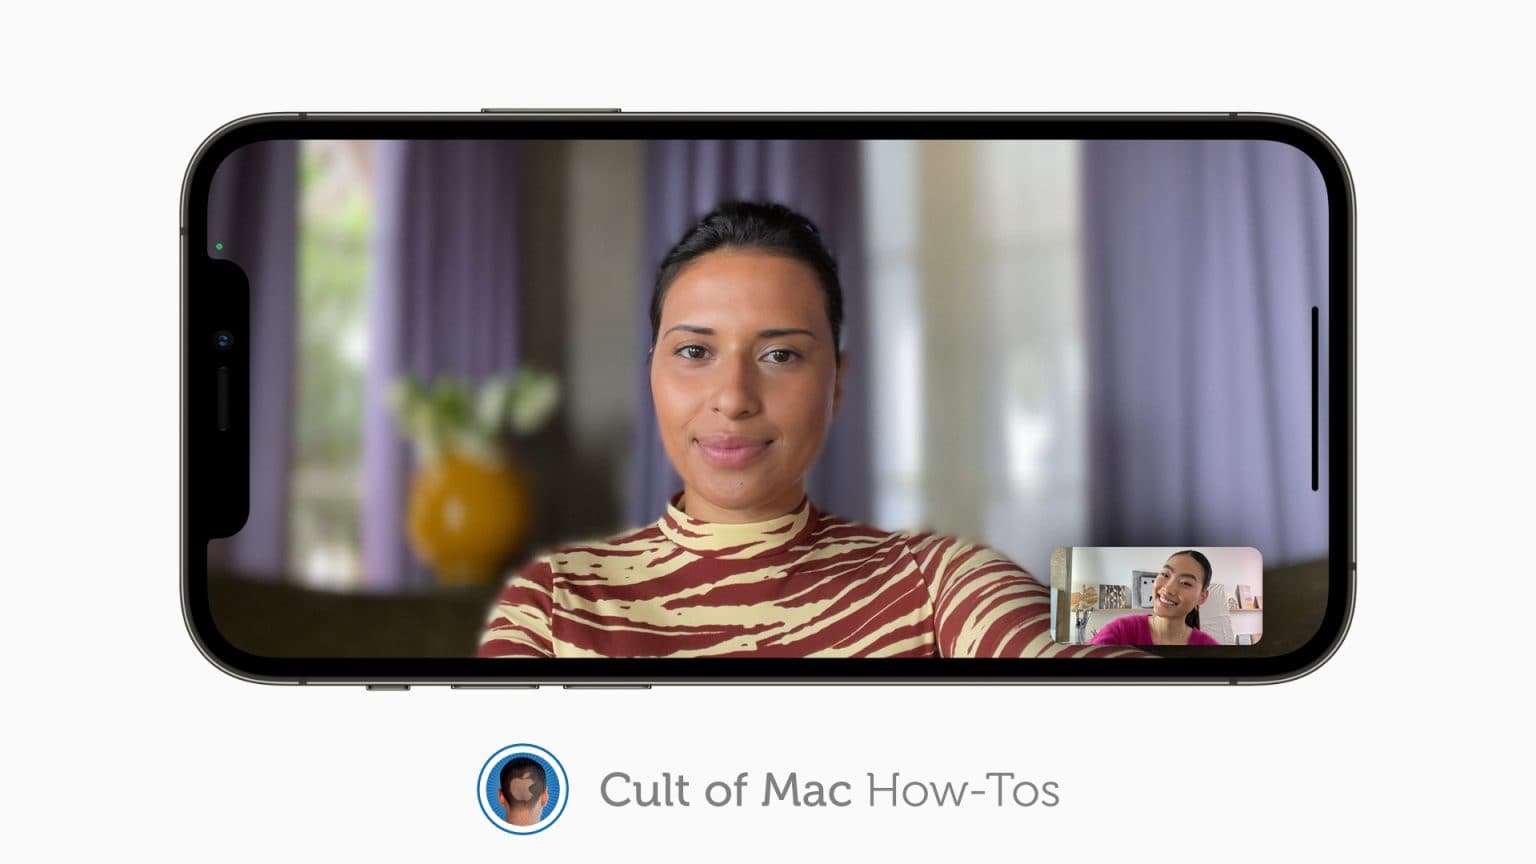 How to enable background blur for FaceTime video calls in iOS 15